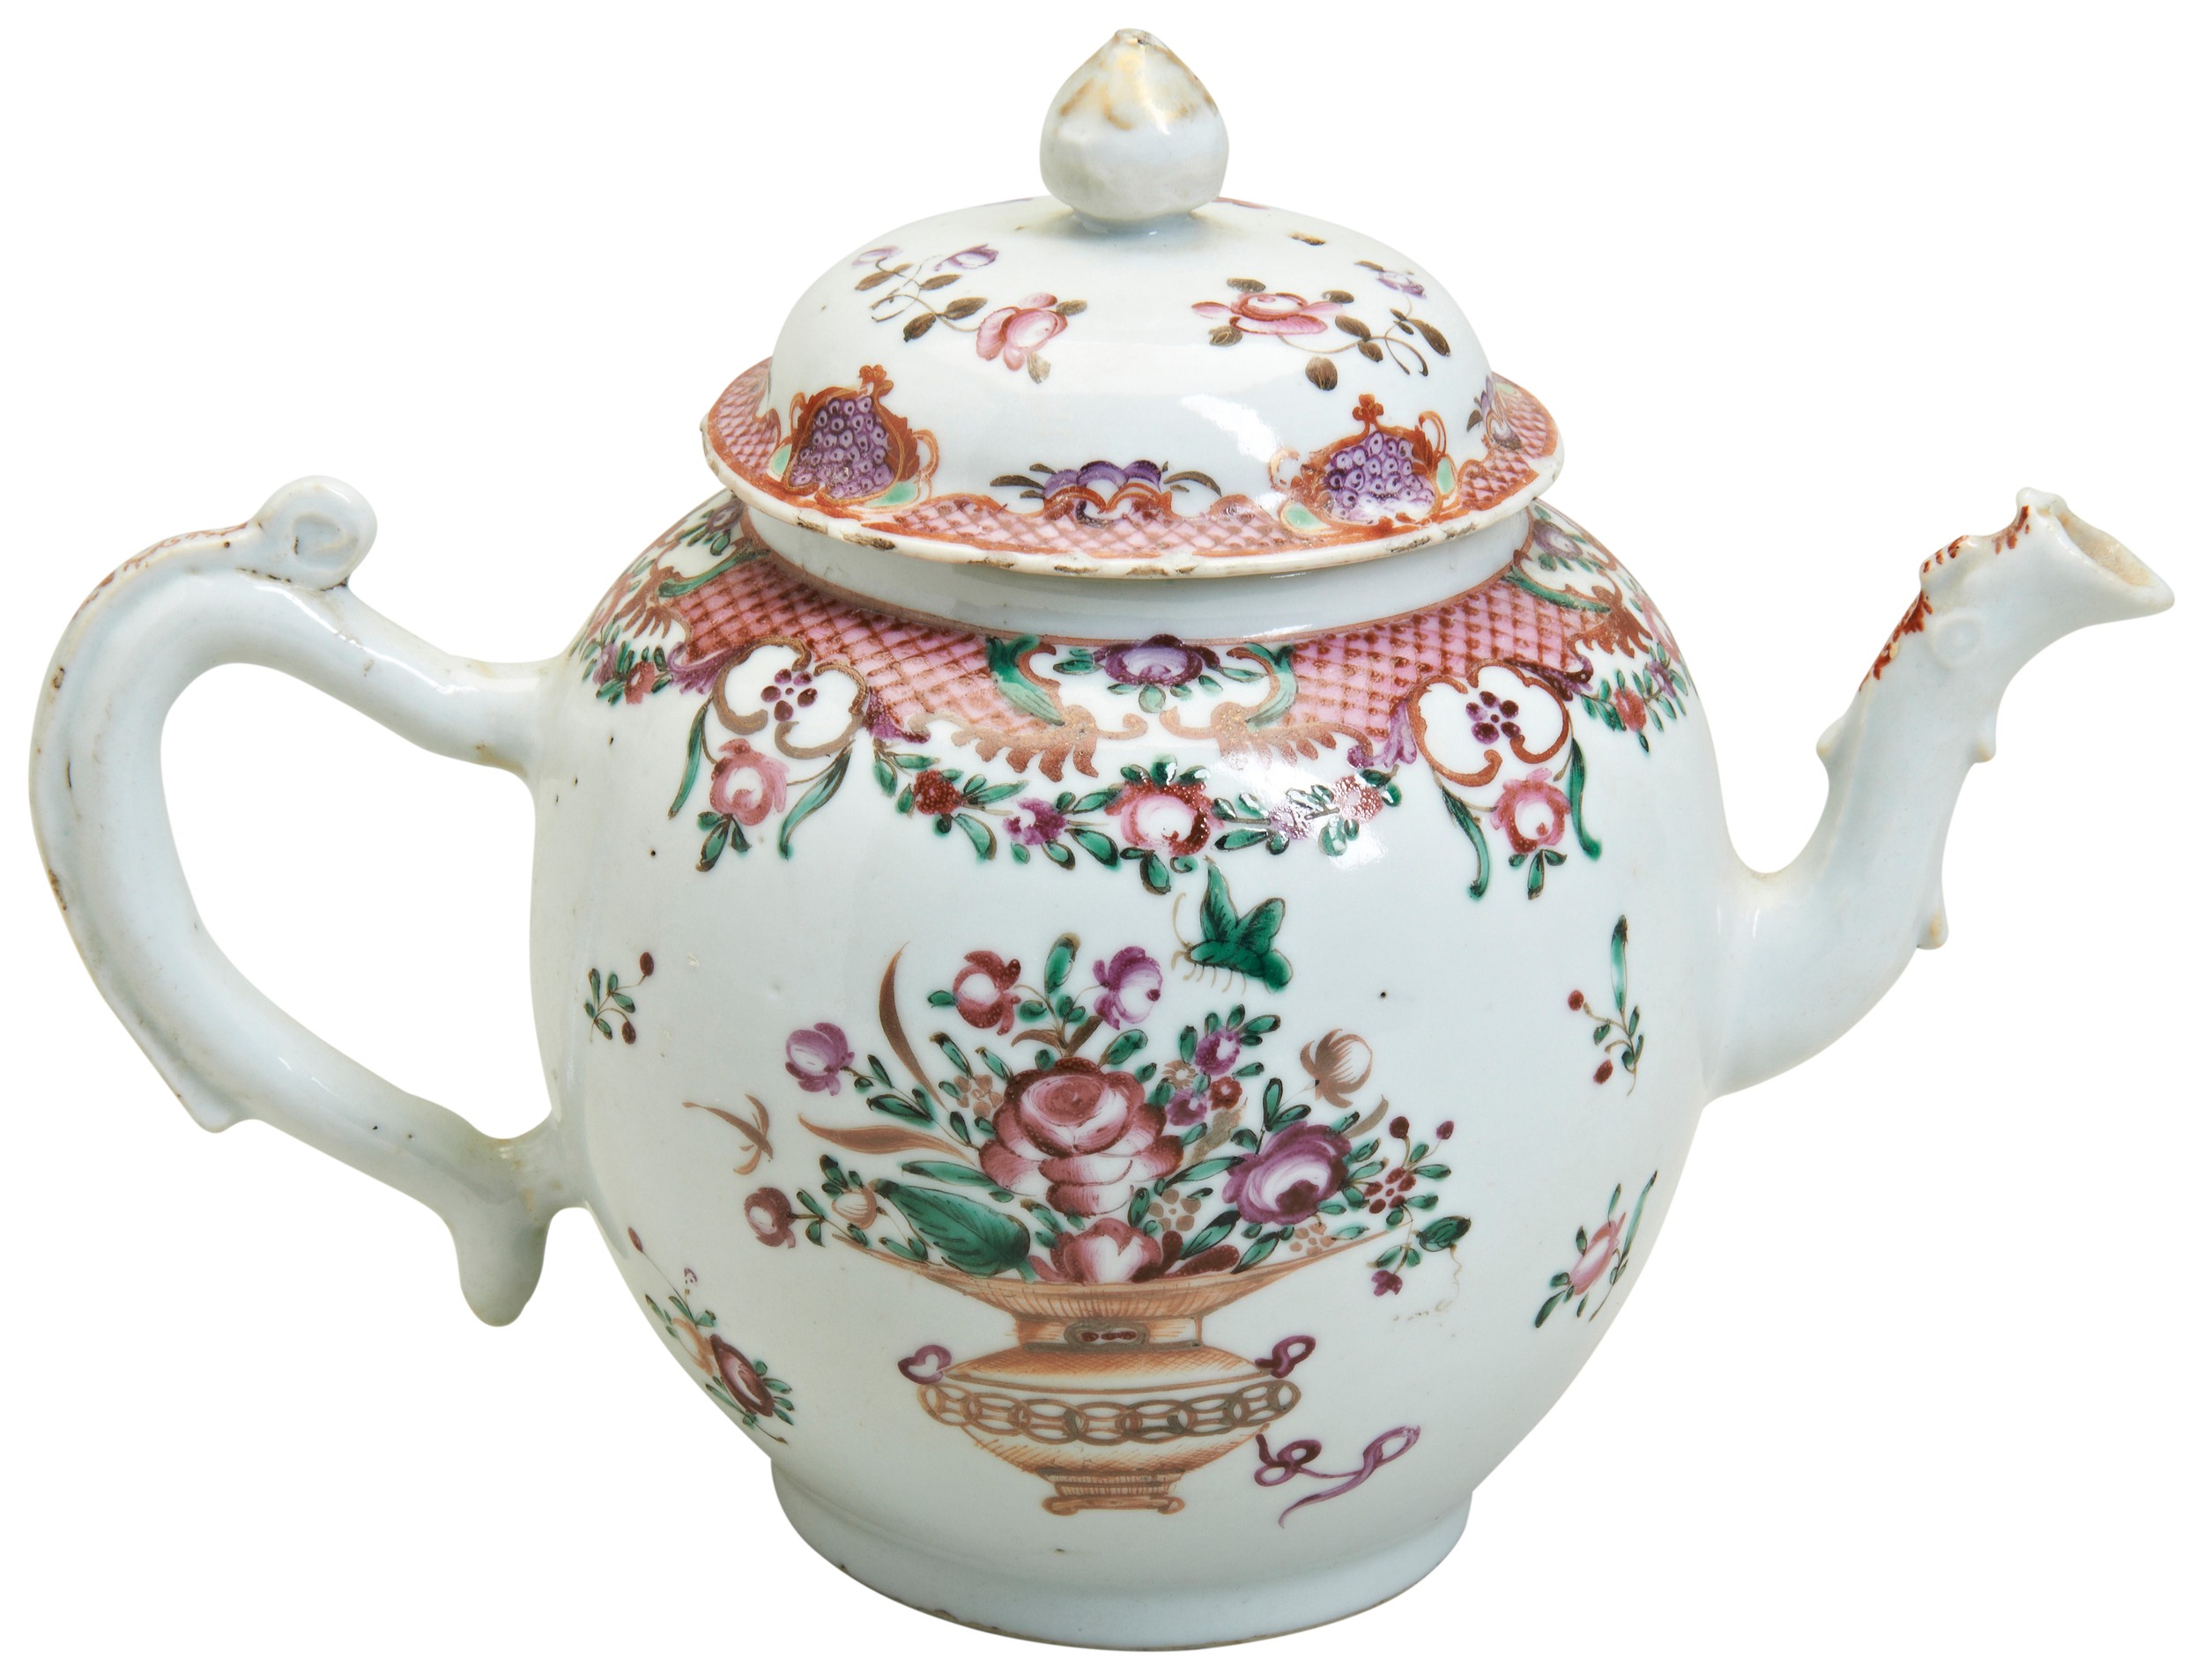 A CHINESE EXPORT FAMILLE ROSE TEAPOT  QIANLONG 18TH CENTURY teapot with lid, decorated with